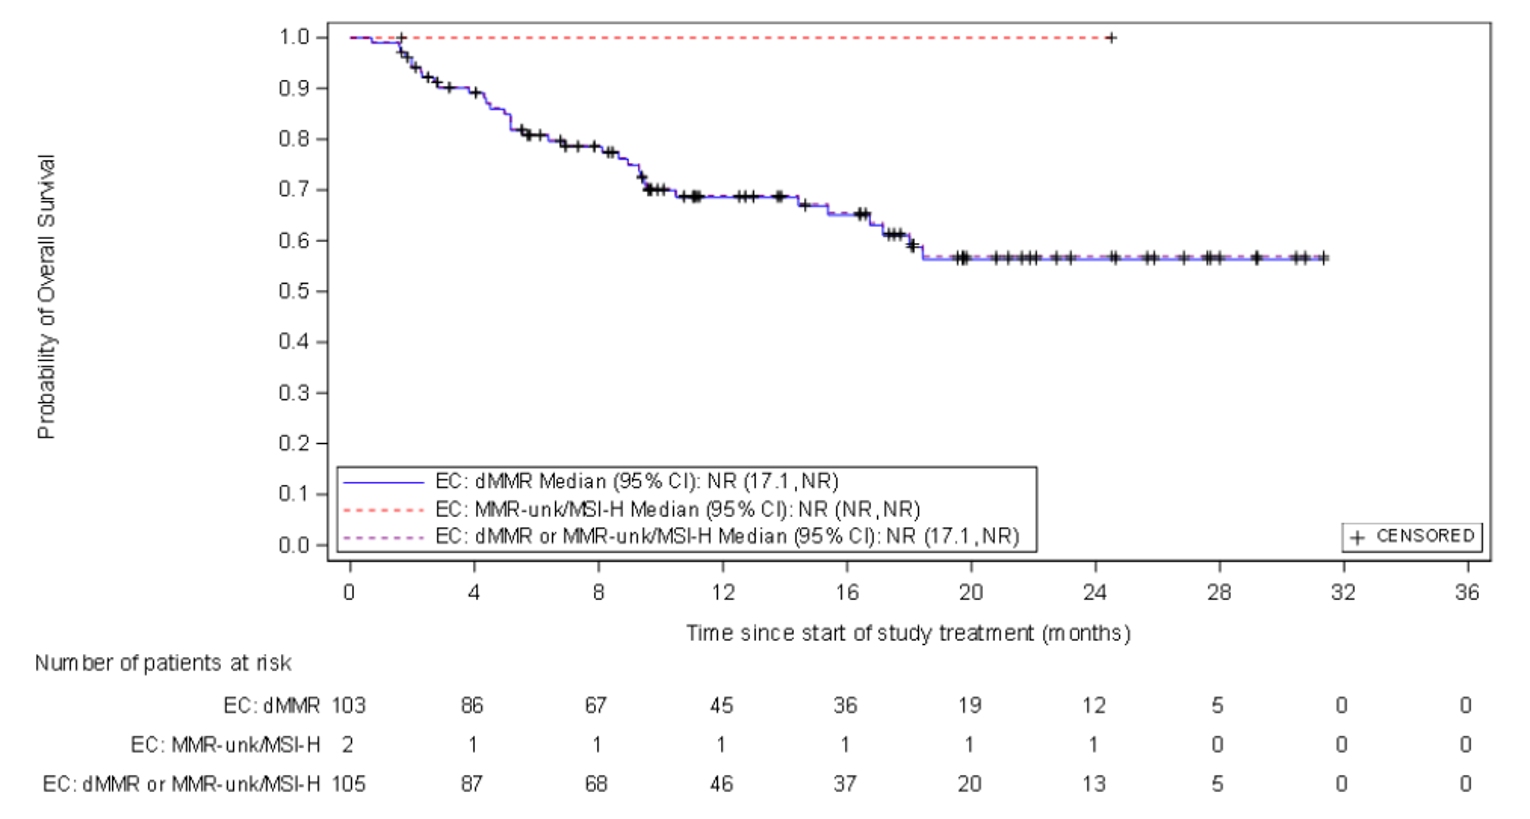 Kaplan-Meier estimates of OS at IA-2 in patients with dMMR or MSI-H EC for the Secondary Efficacy Analysis Dataset. The total number of at-risk patients in the dMMR or MMR-unk/MSI-H EC at 0, 4, 8, 12, 16, 20, 24, 28, 32, and 36 months was 87, 68, 46, 37, 20, 13, 5, 0, 0, respectively.